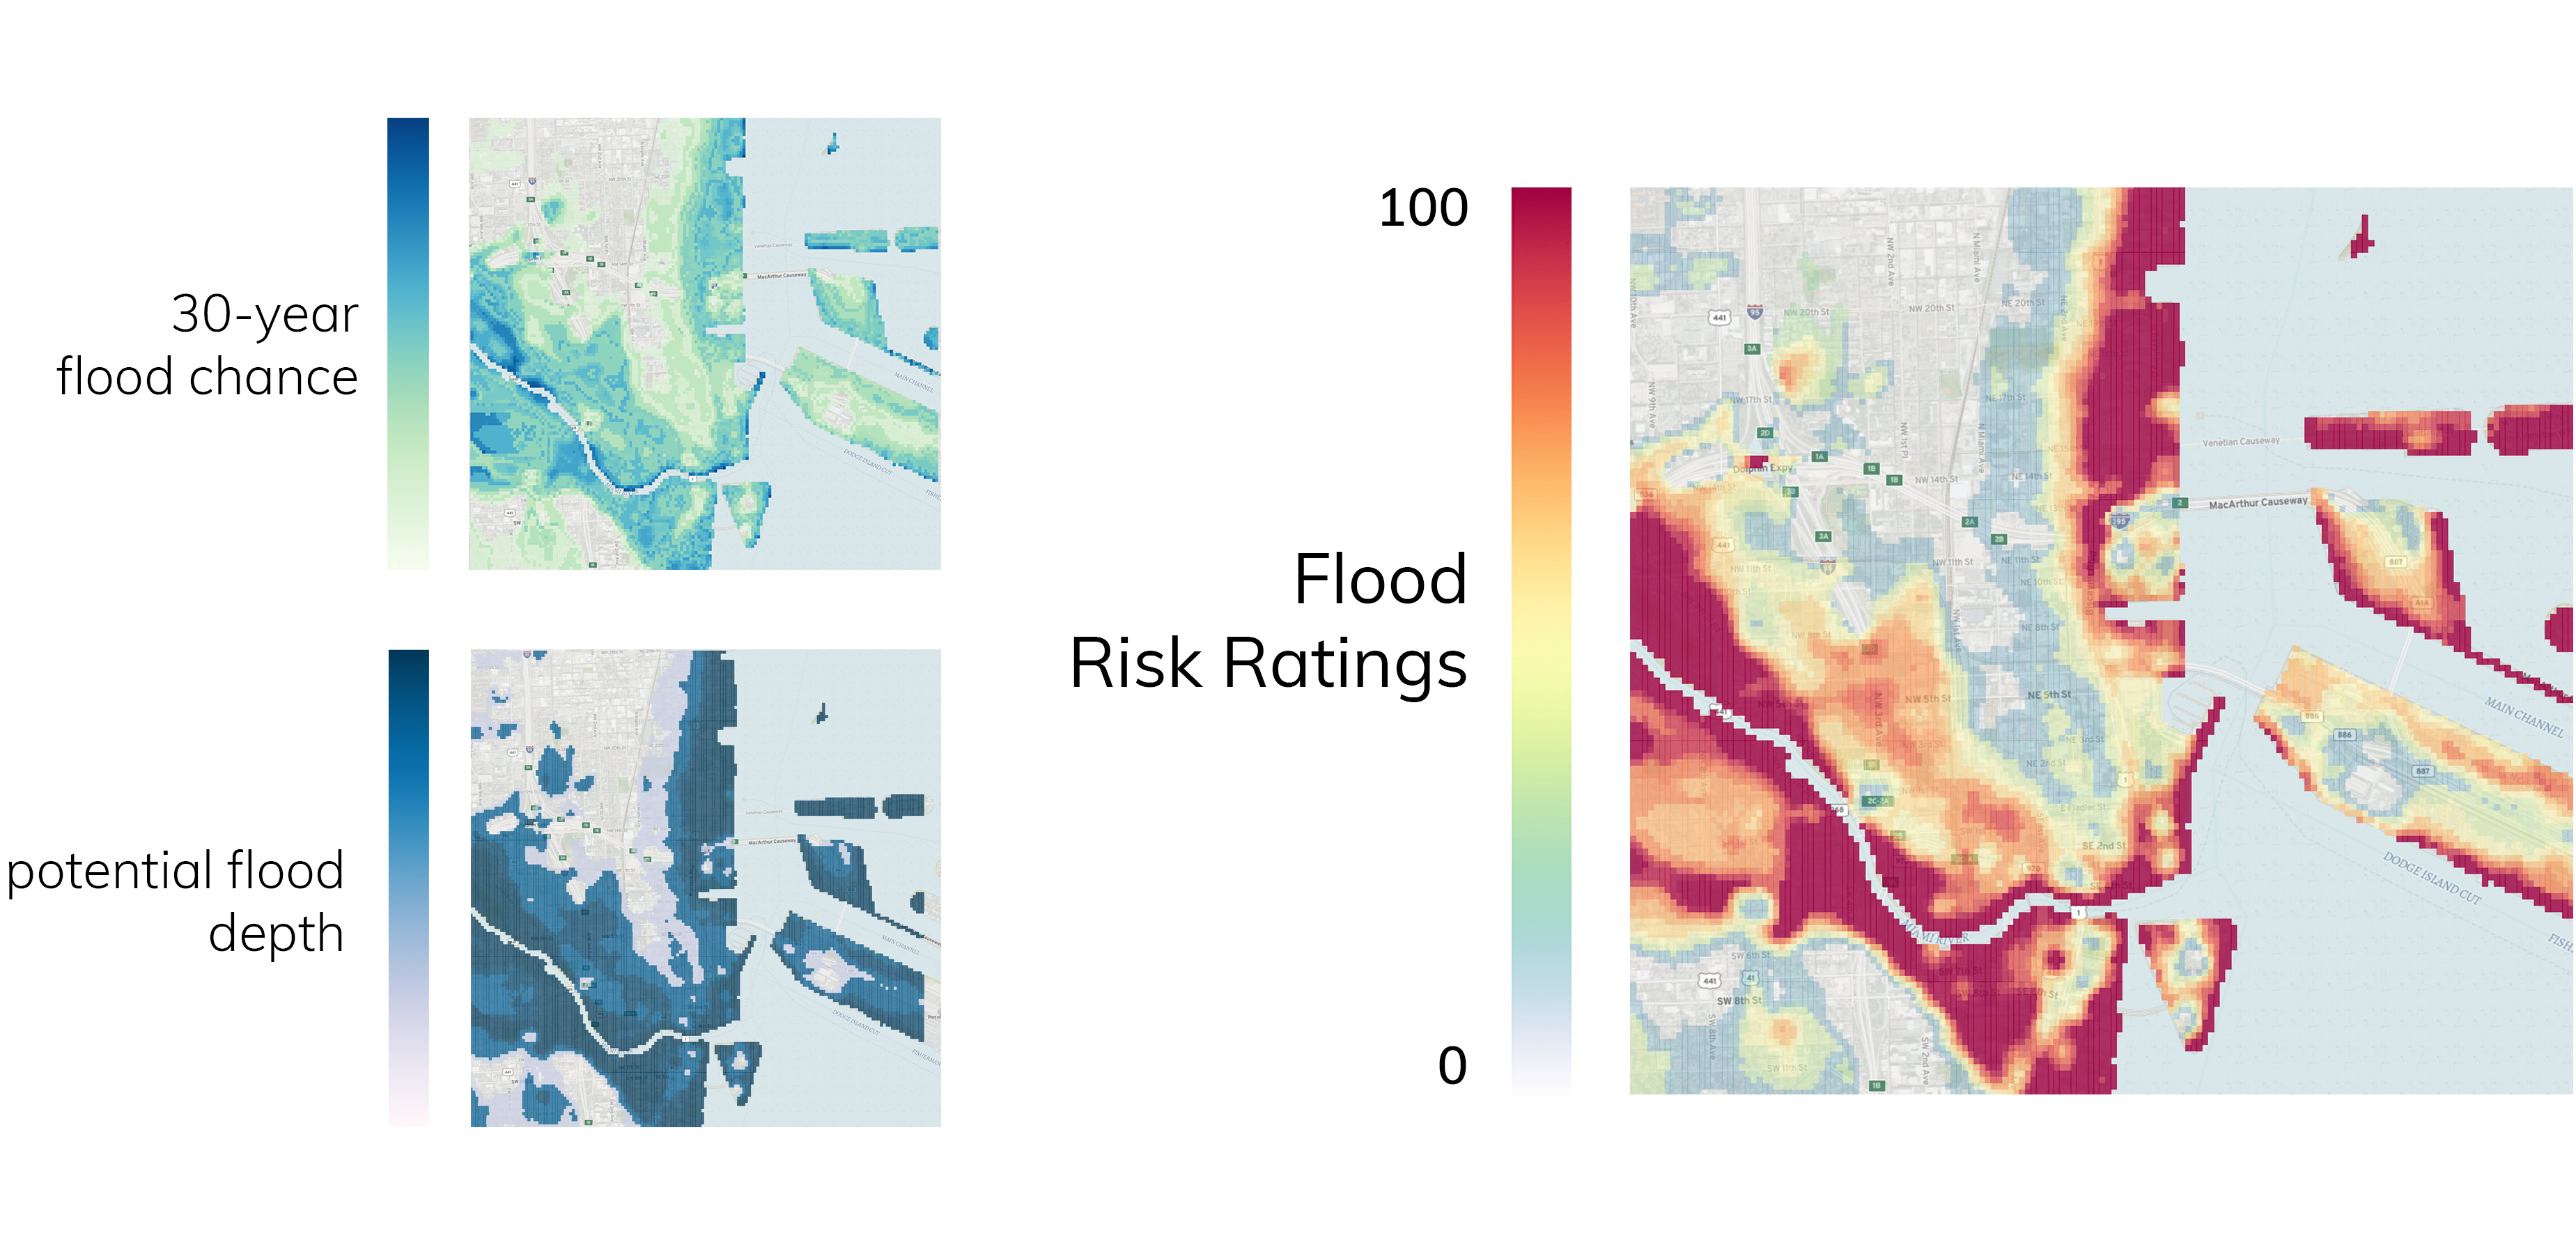 the 30-year chance of flooding, and the potential depth of flooding, contribute to flood risk ratings.